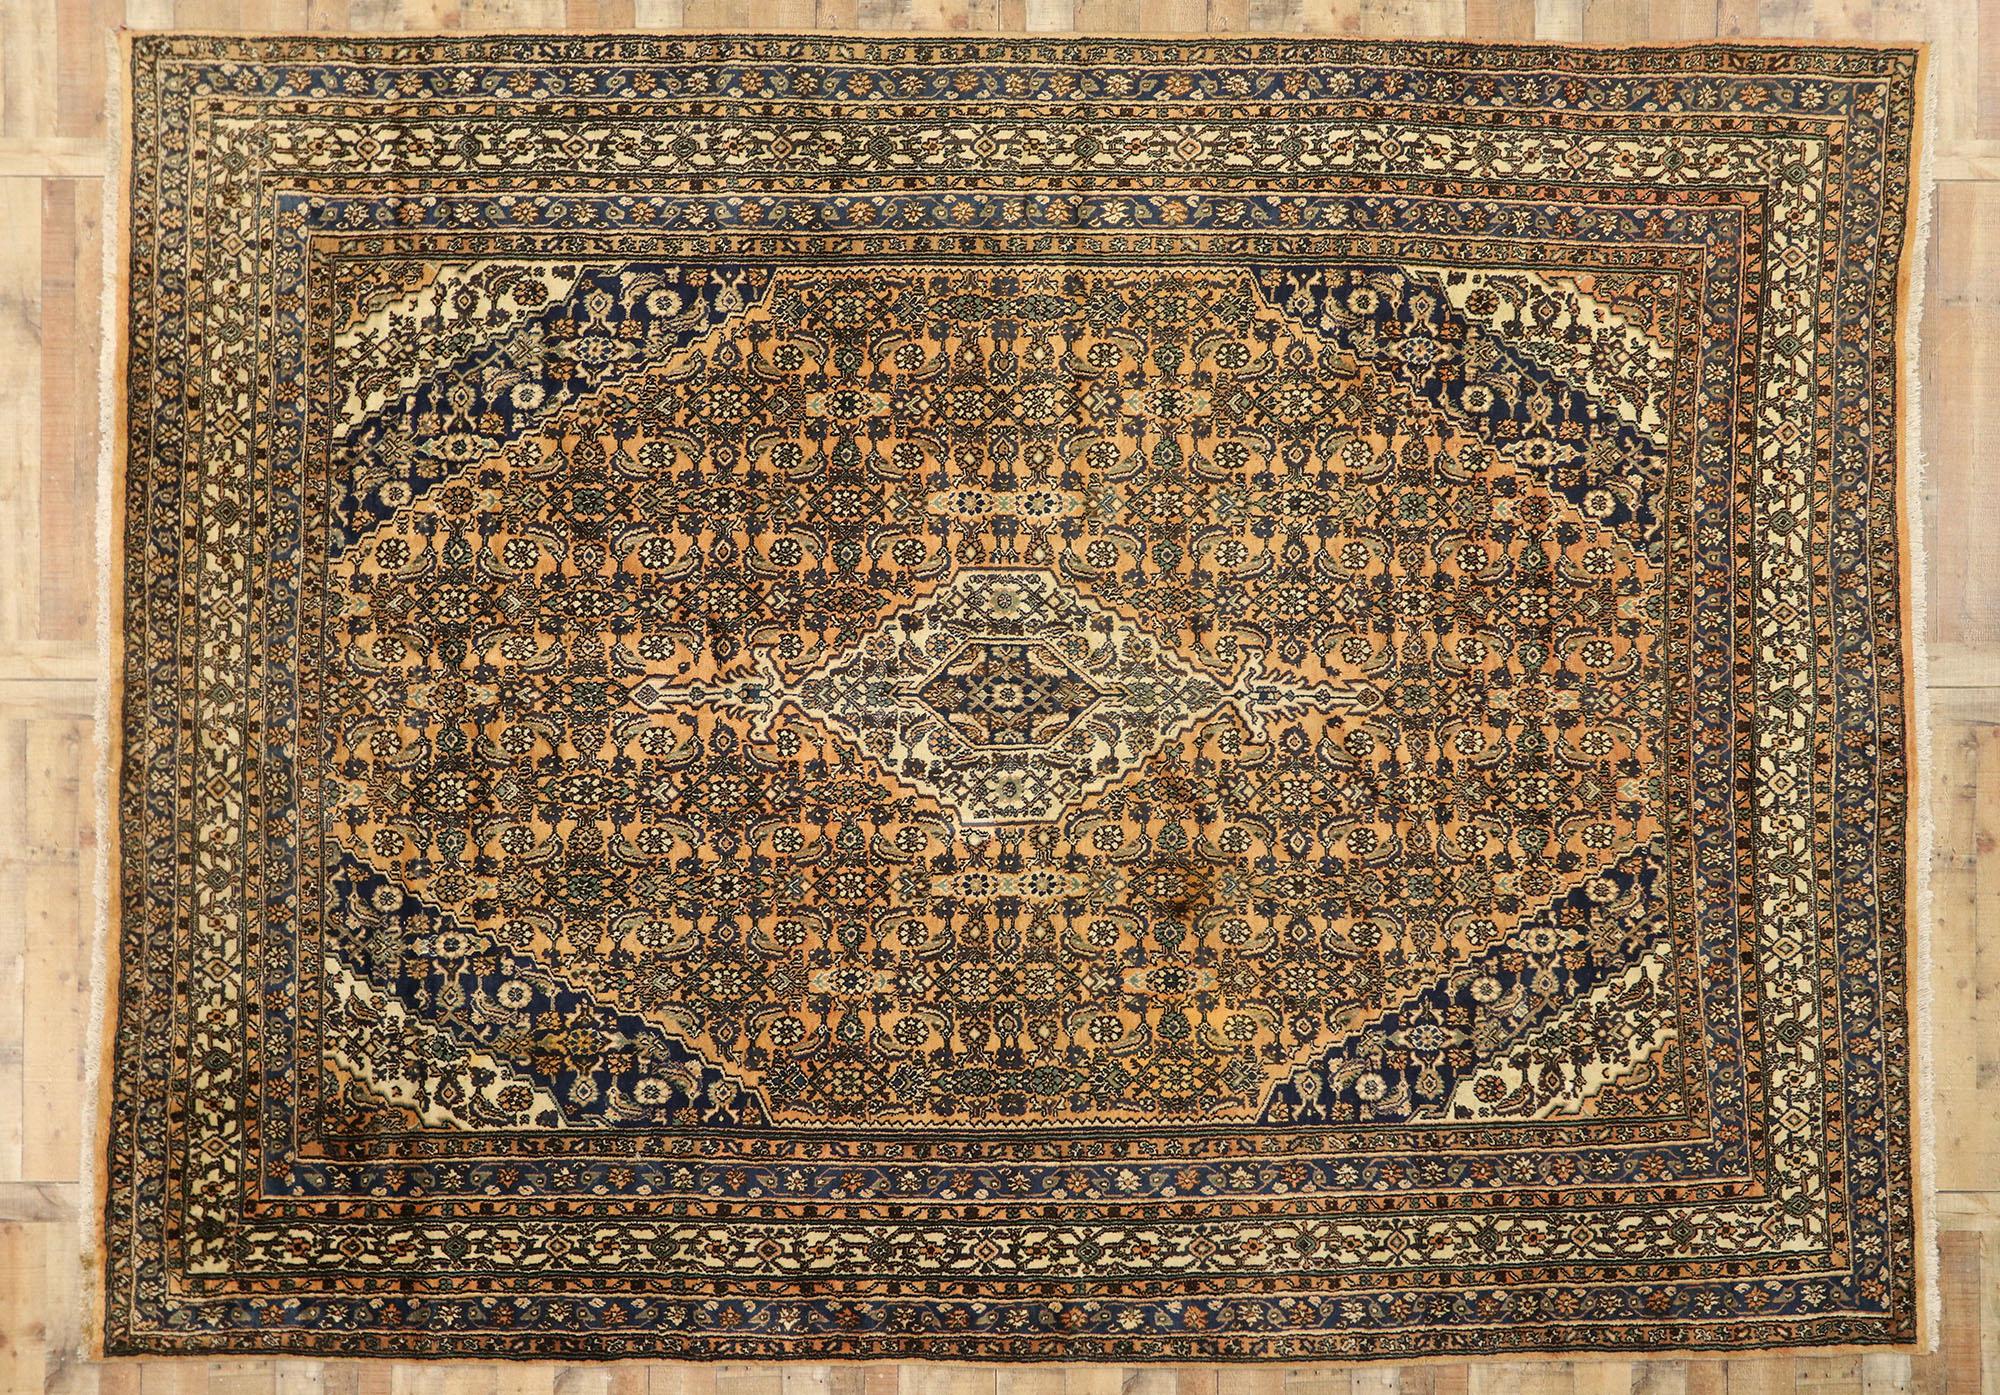 Vintage Persian Hamadan Area Rug with Mediterranean Rustic Tuscan Style In Good Condition For Sale In Dallas, TX